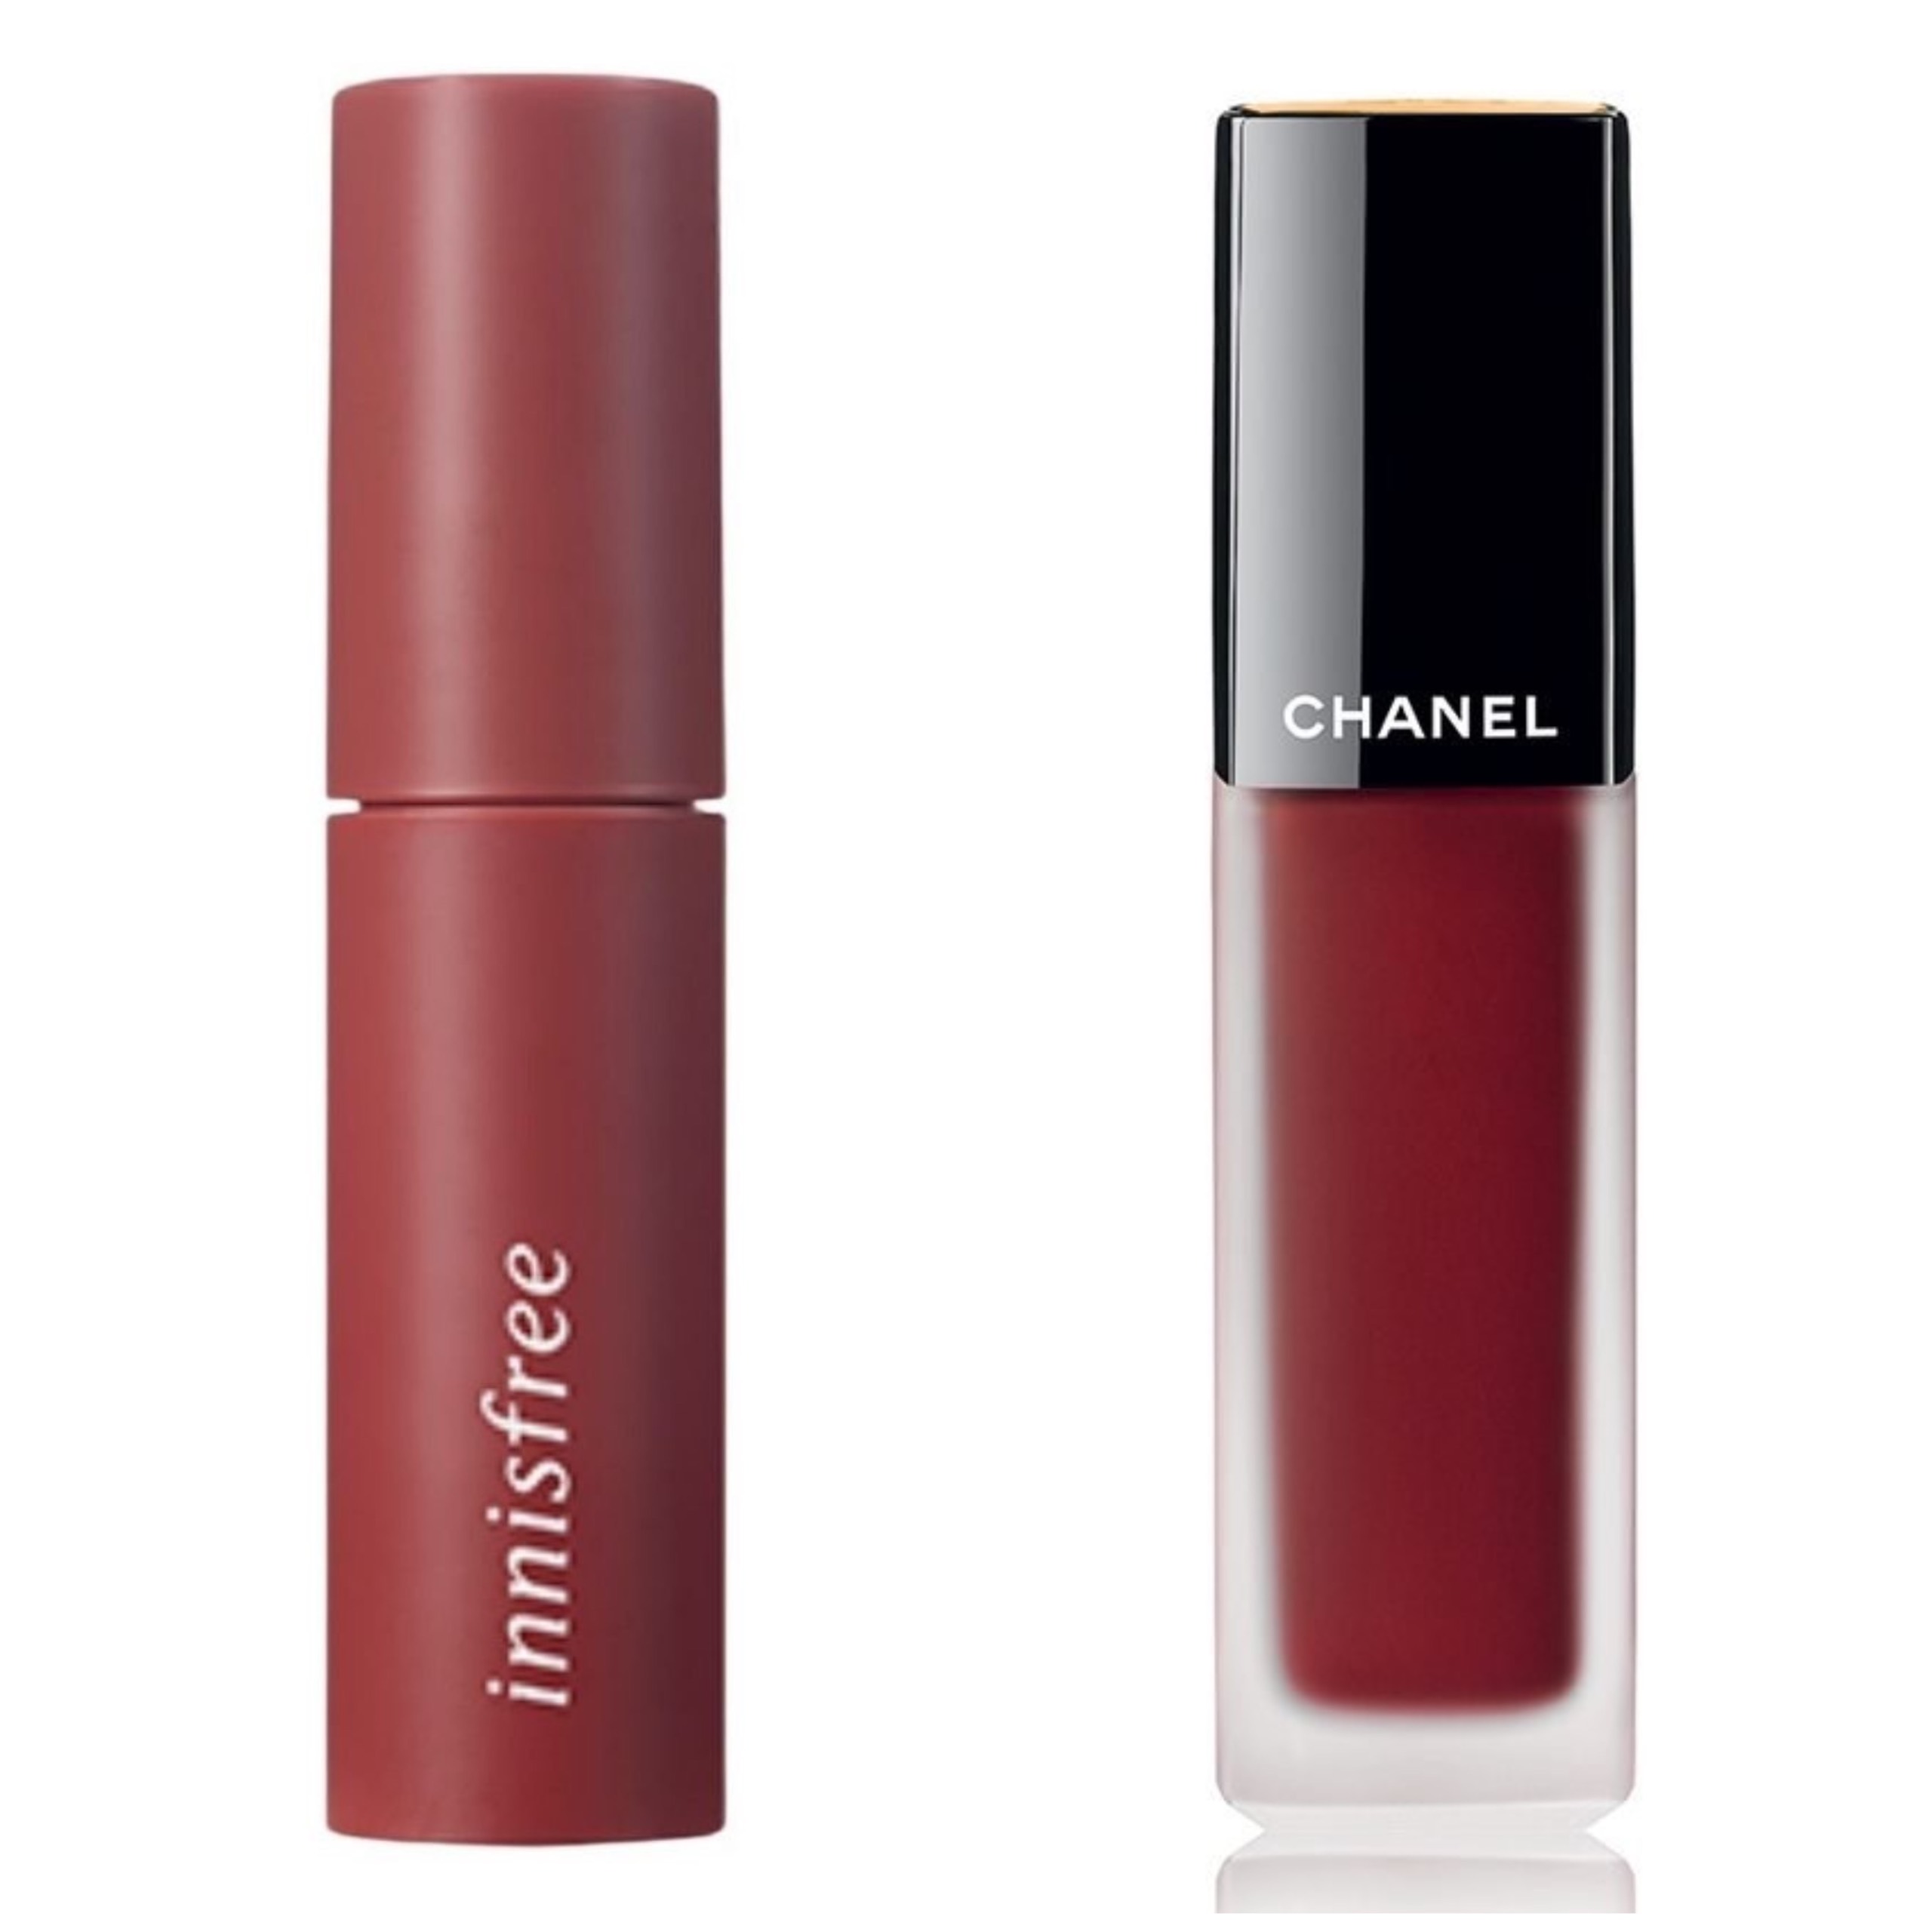 Bản dupe của Chanel Rouge Allure Ink no.154